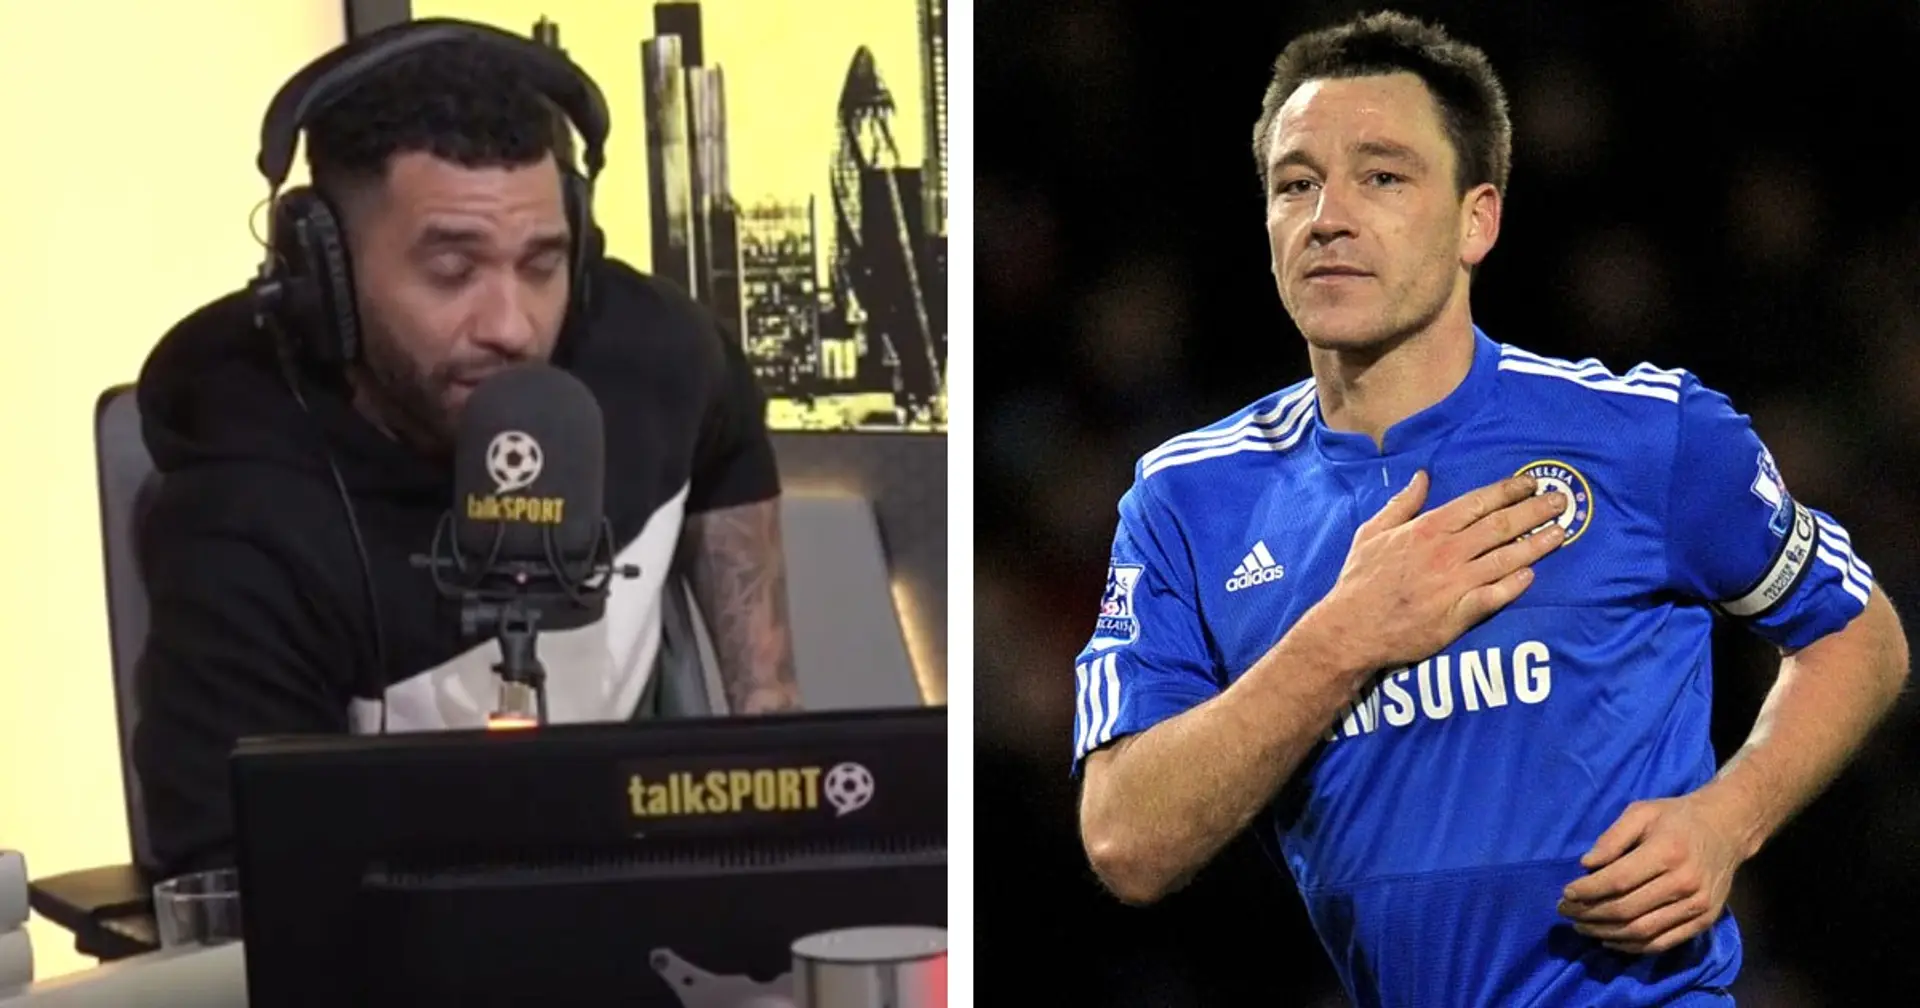 'I've seen him get turned inside out': Ex-Arsenal forward takes a dig at John Terry, says Van Dijk is better